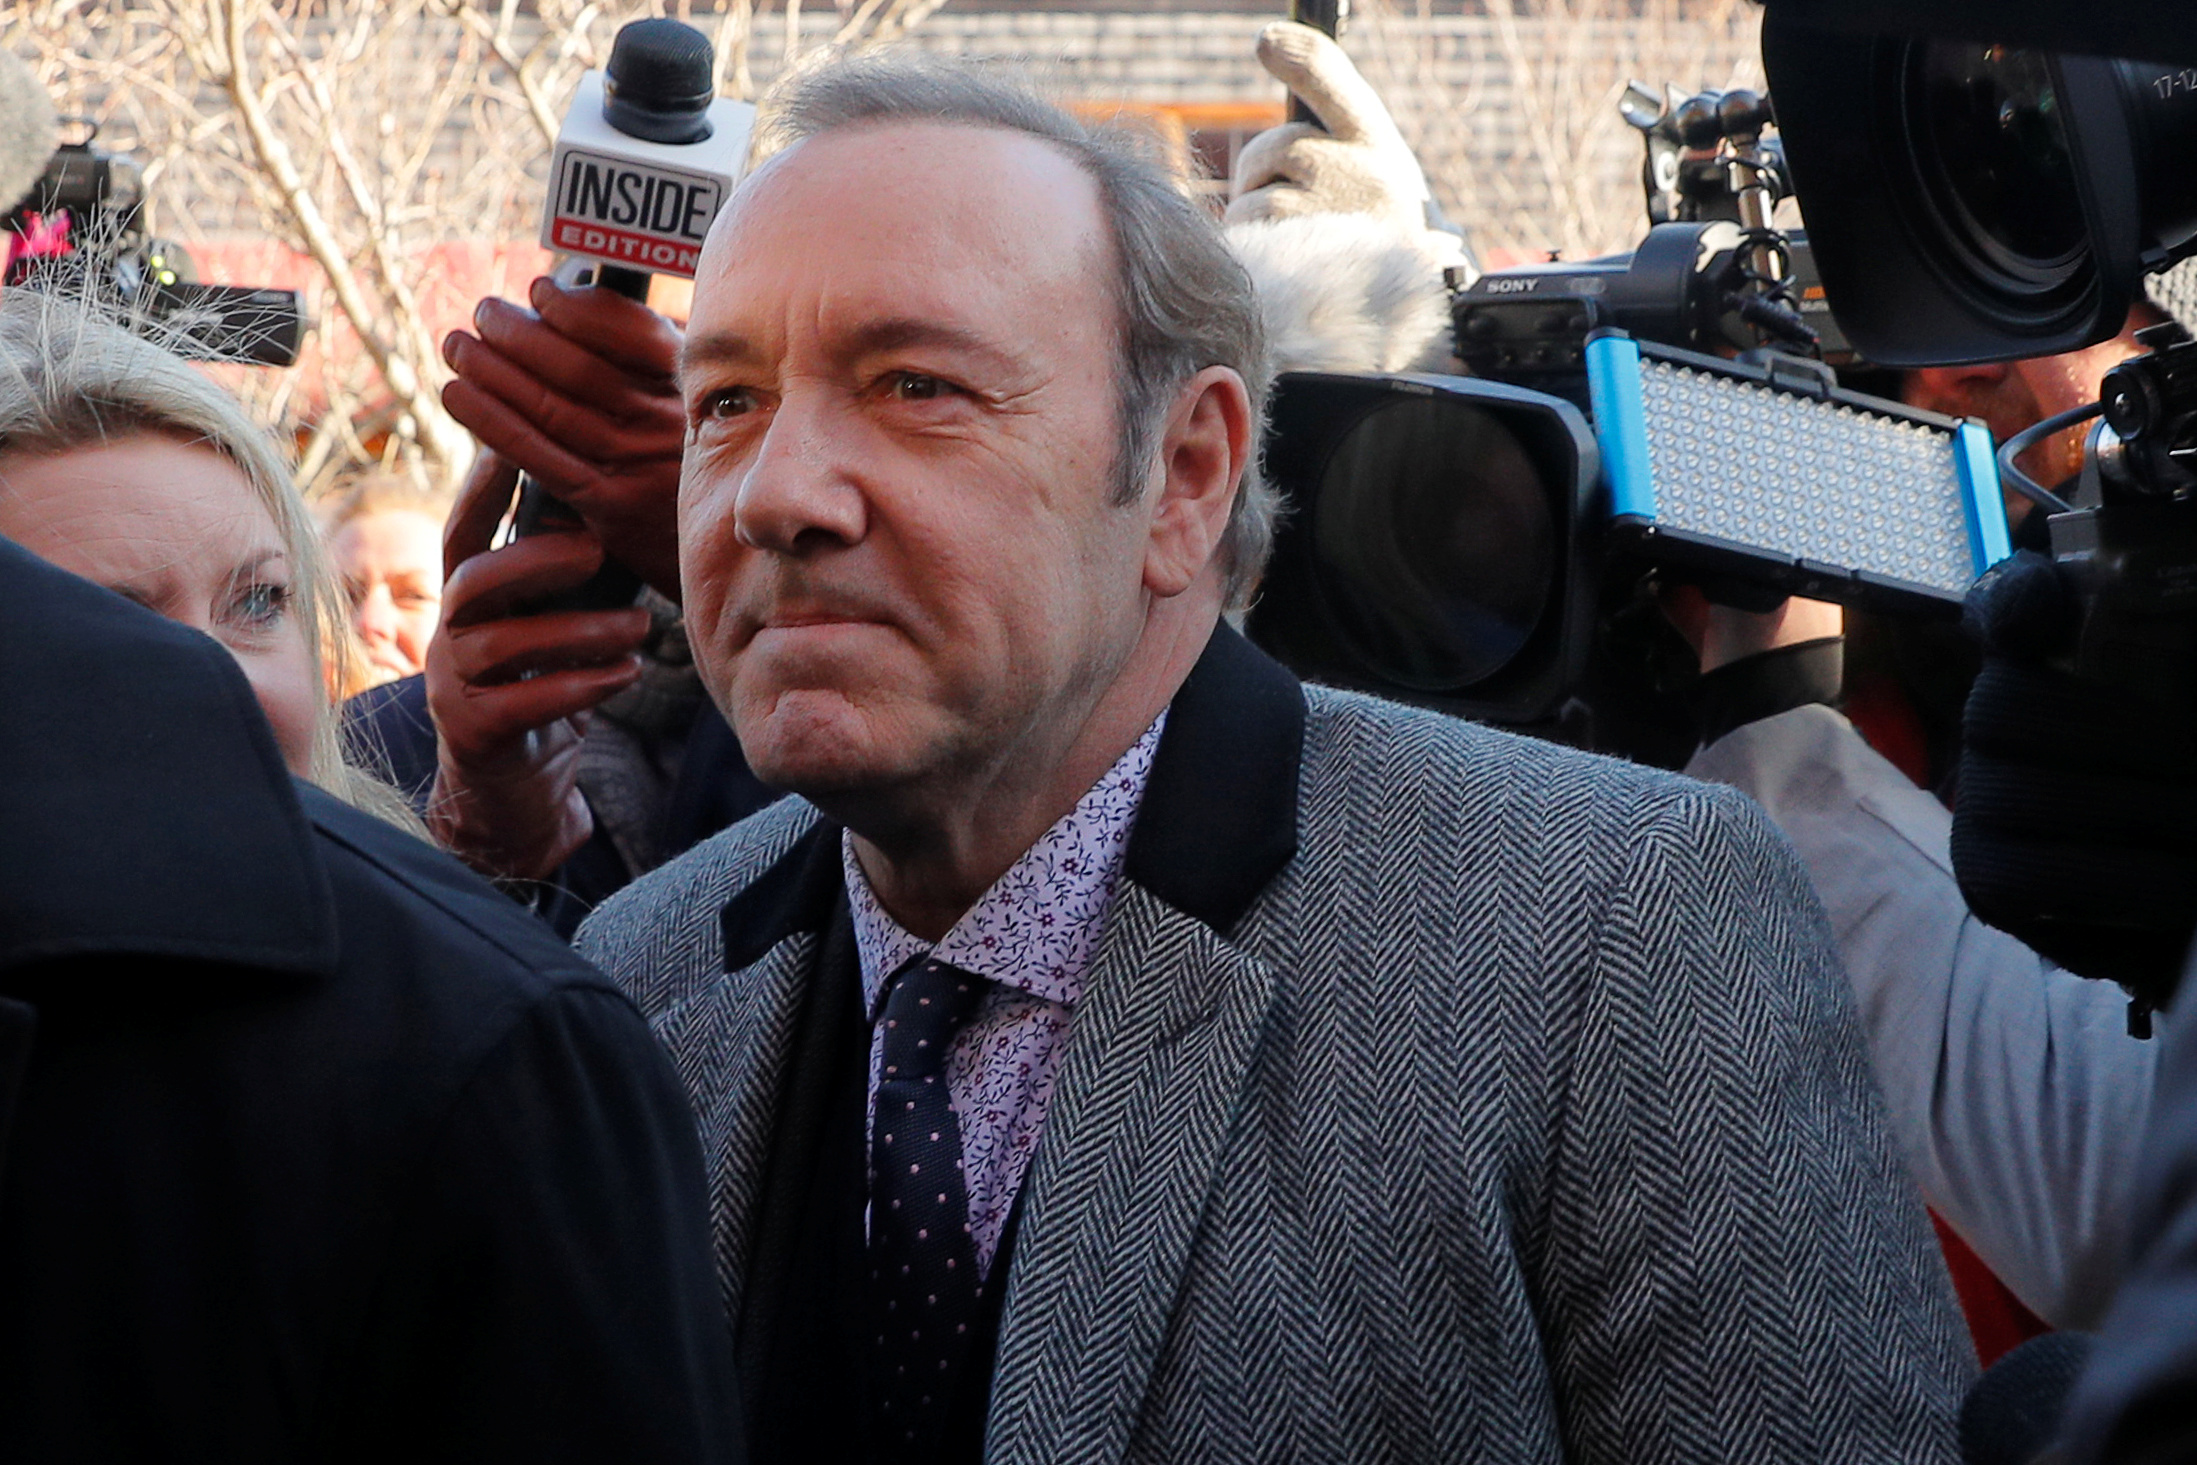 Actor Kevin Spacey arrives to face a sexual assault charge at Nantucket District Court in Nantucket, Massachusetts, U.S., January 7, 2019. REUTERS/Brian Snyder - RC1E6A3895A0